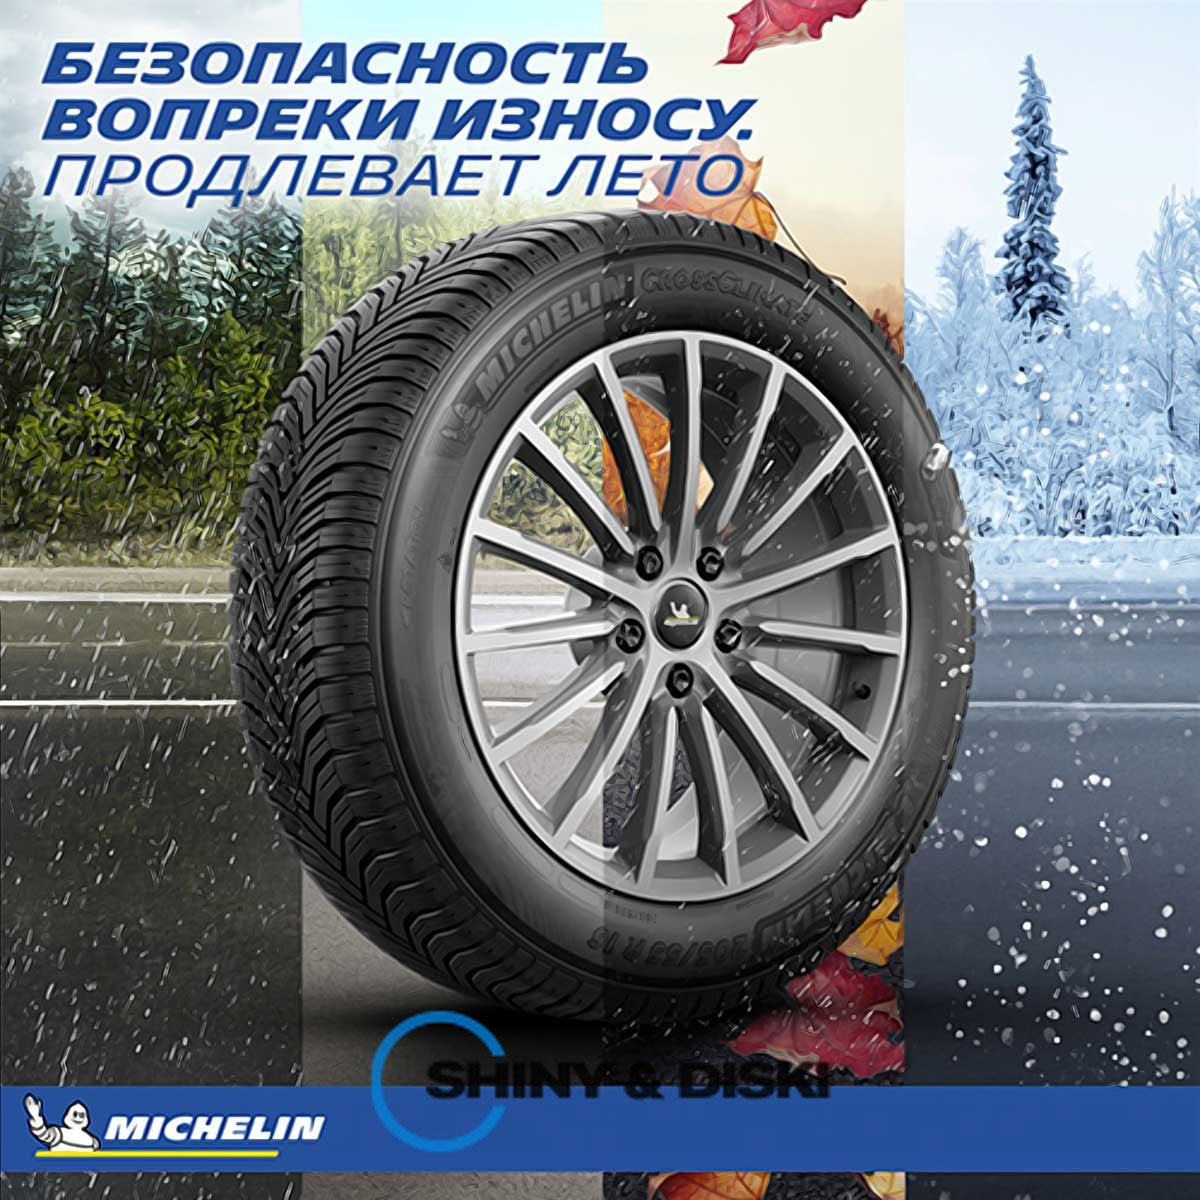 покрышки michelin cross climate+ 195/55 r16 91h